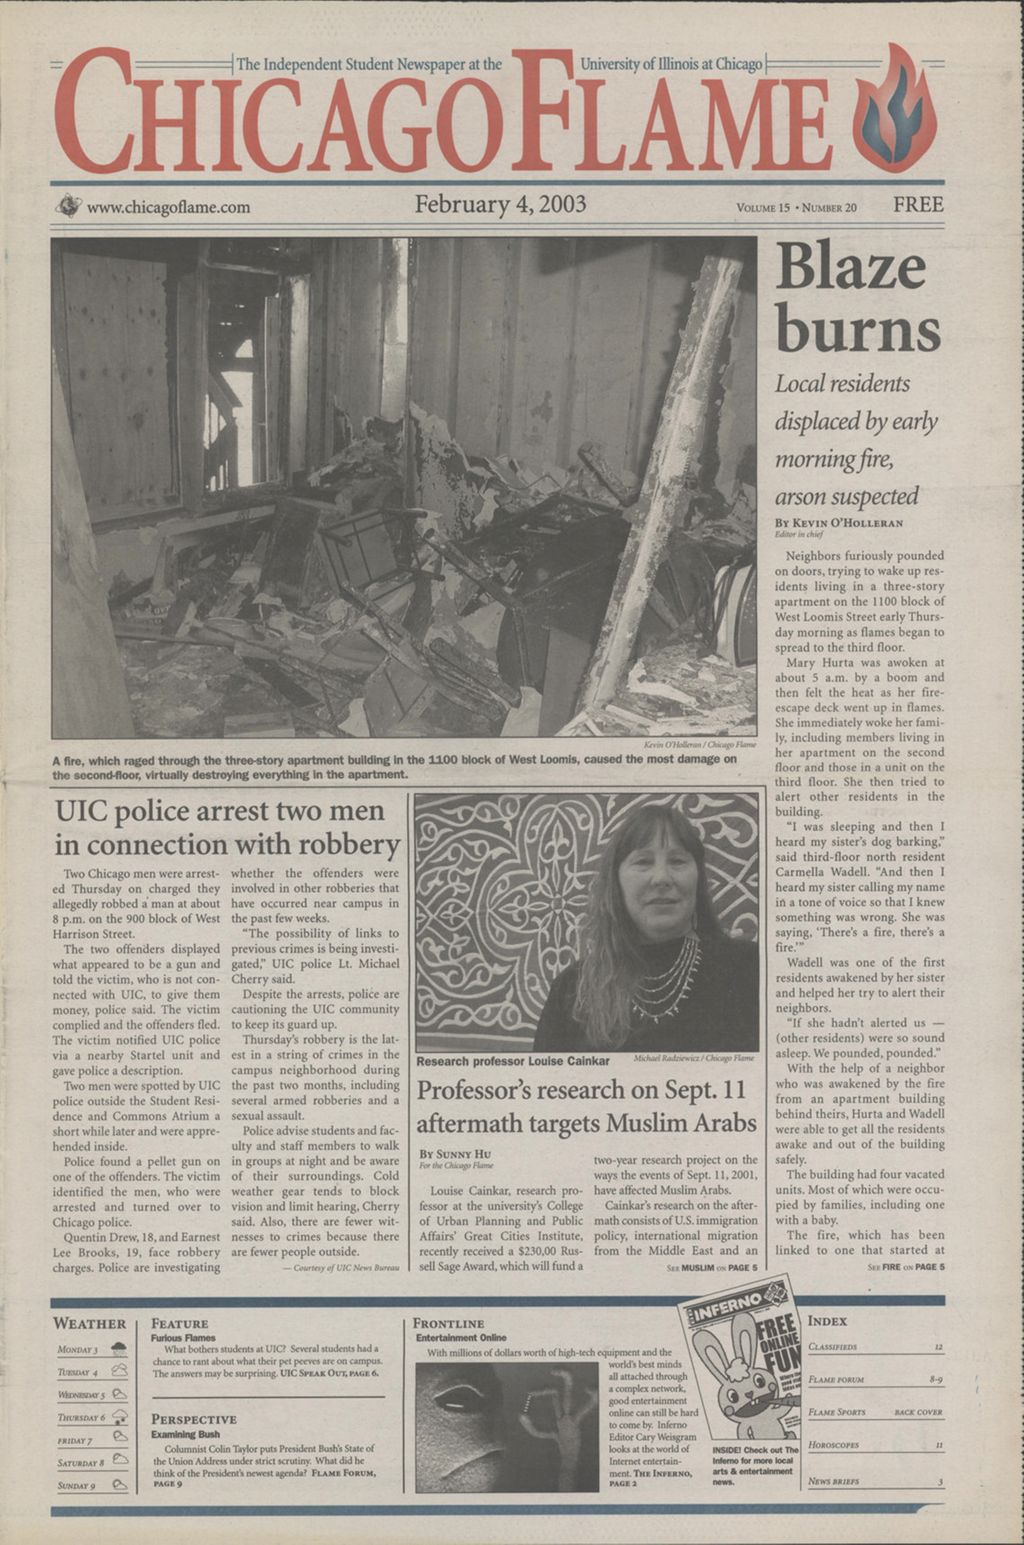 Chicago Flame (February 4, 2003)